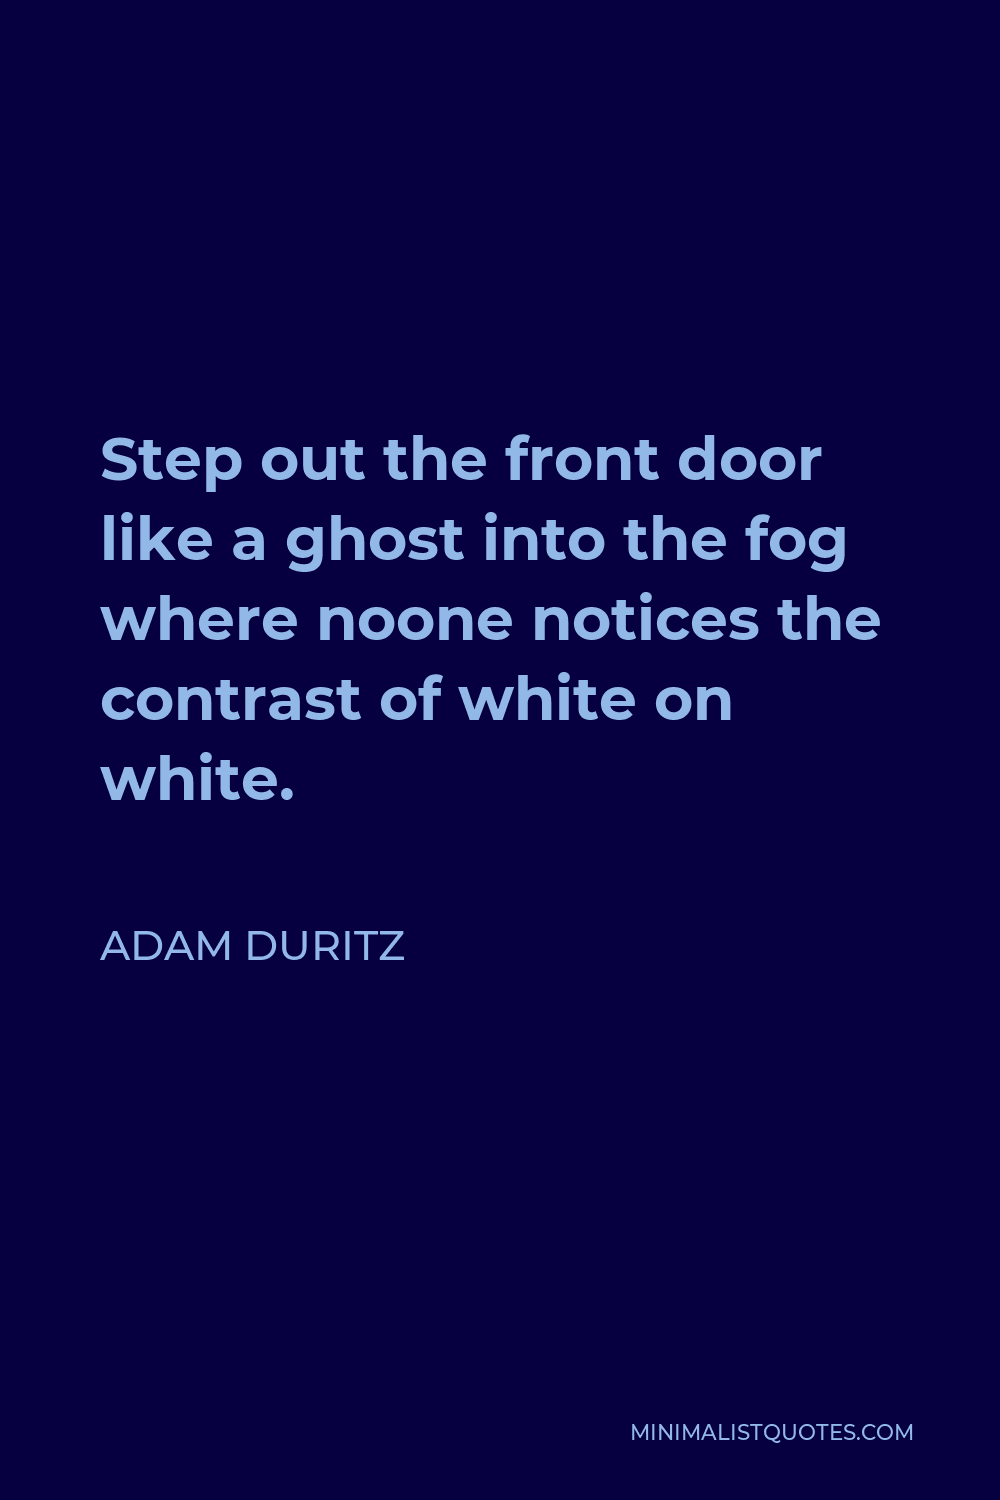 Adam Duritz Quote - Step out the front door like a ghost into the fog where noone notices the contrast of white on white.